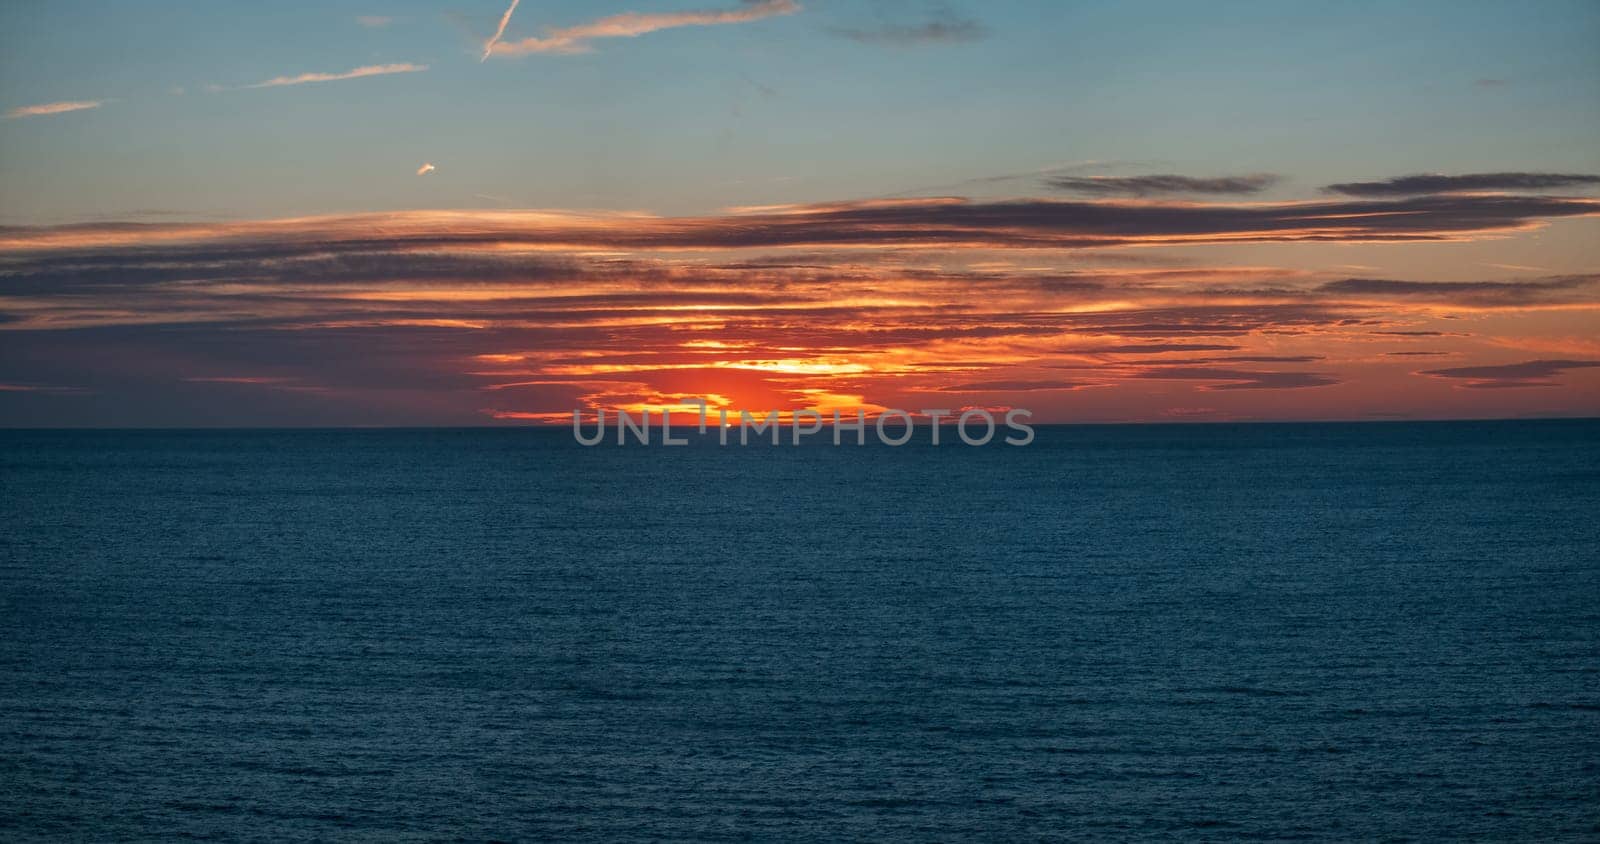 Stunning ocean sunset with vivid sky hues & tranquil sea.